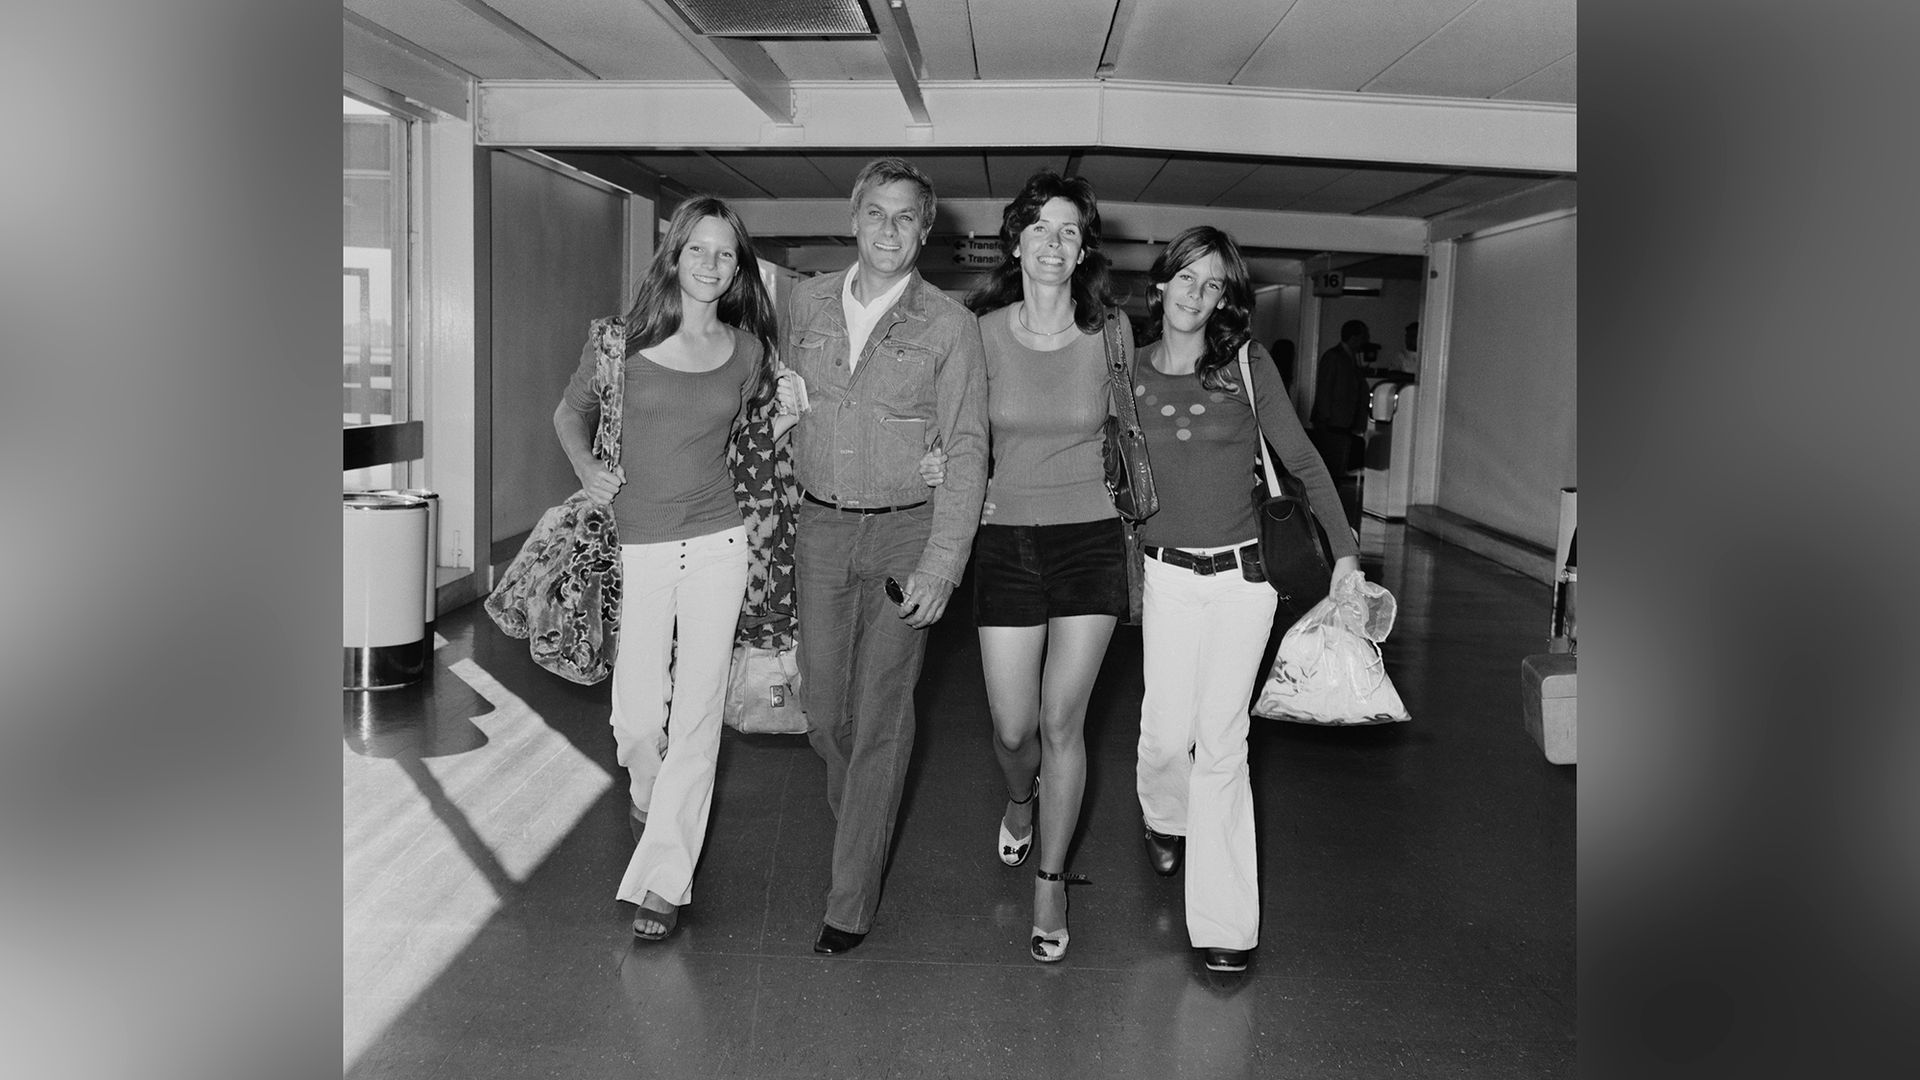 Jamie Lee Curtis in her youth (far right)